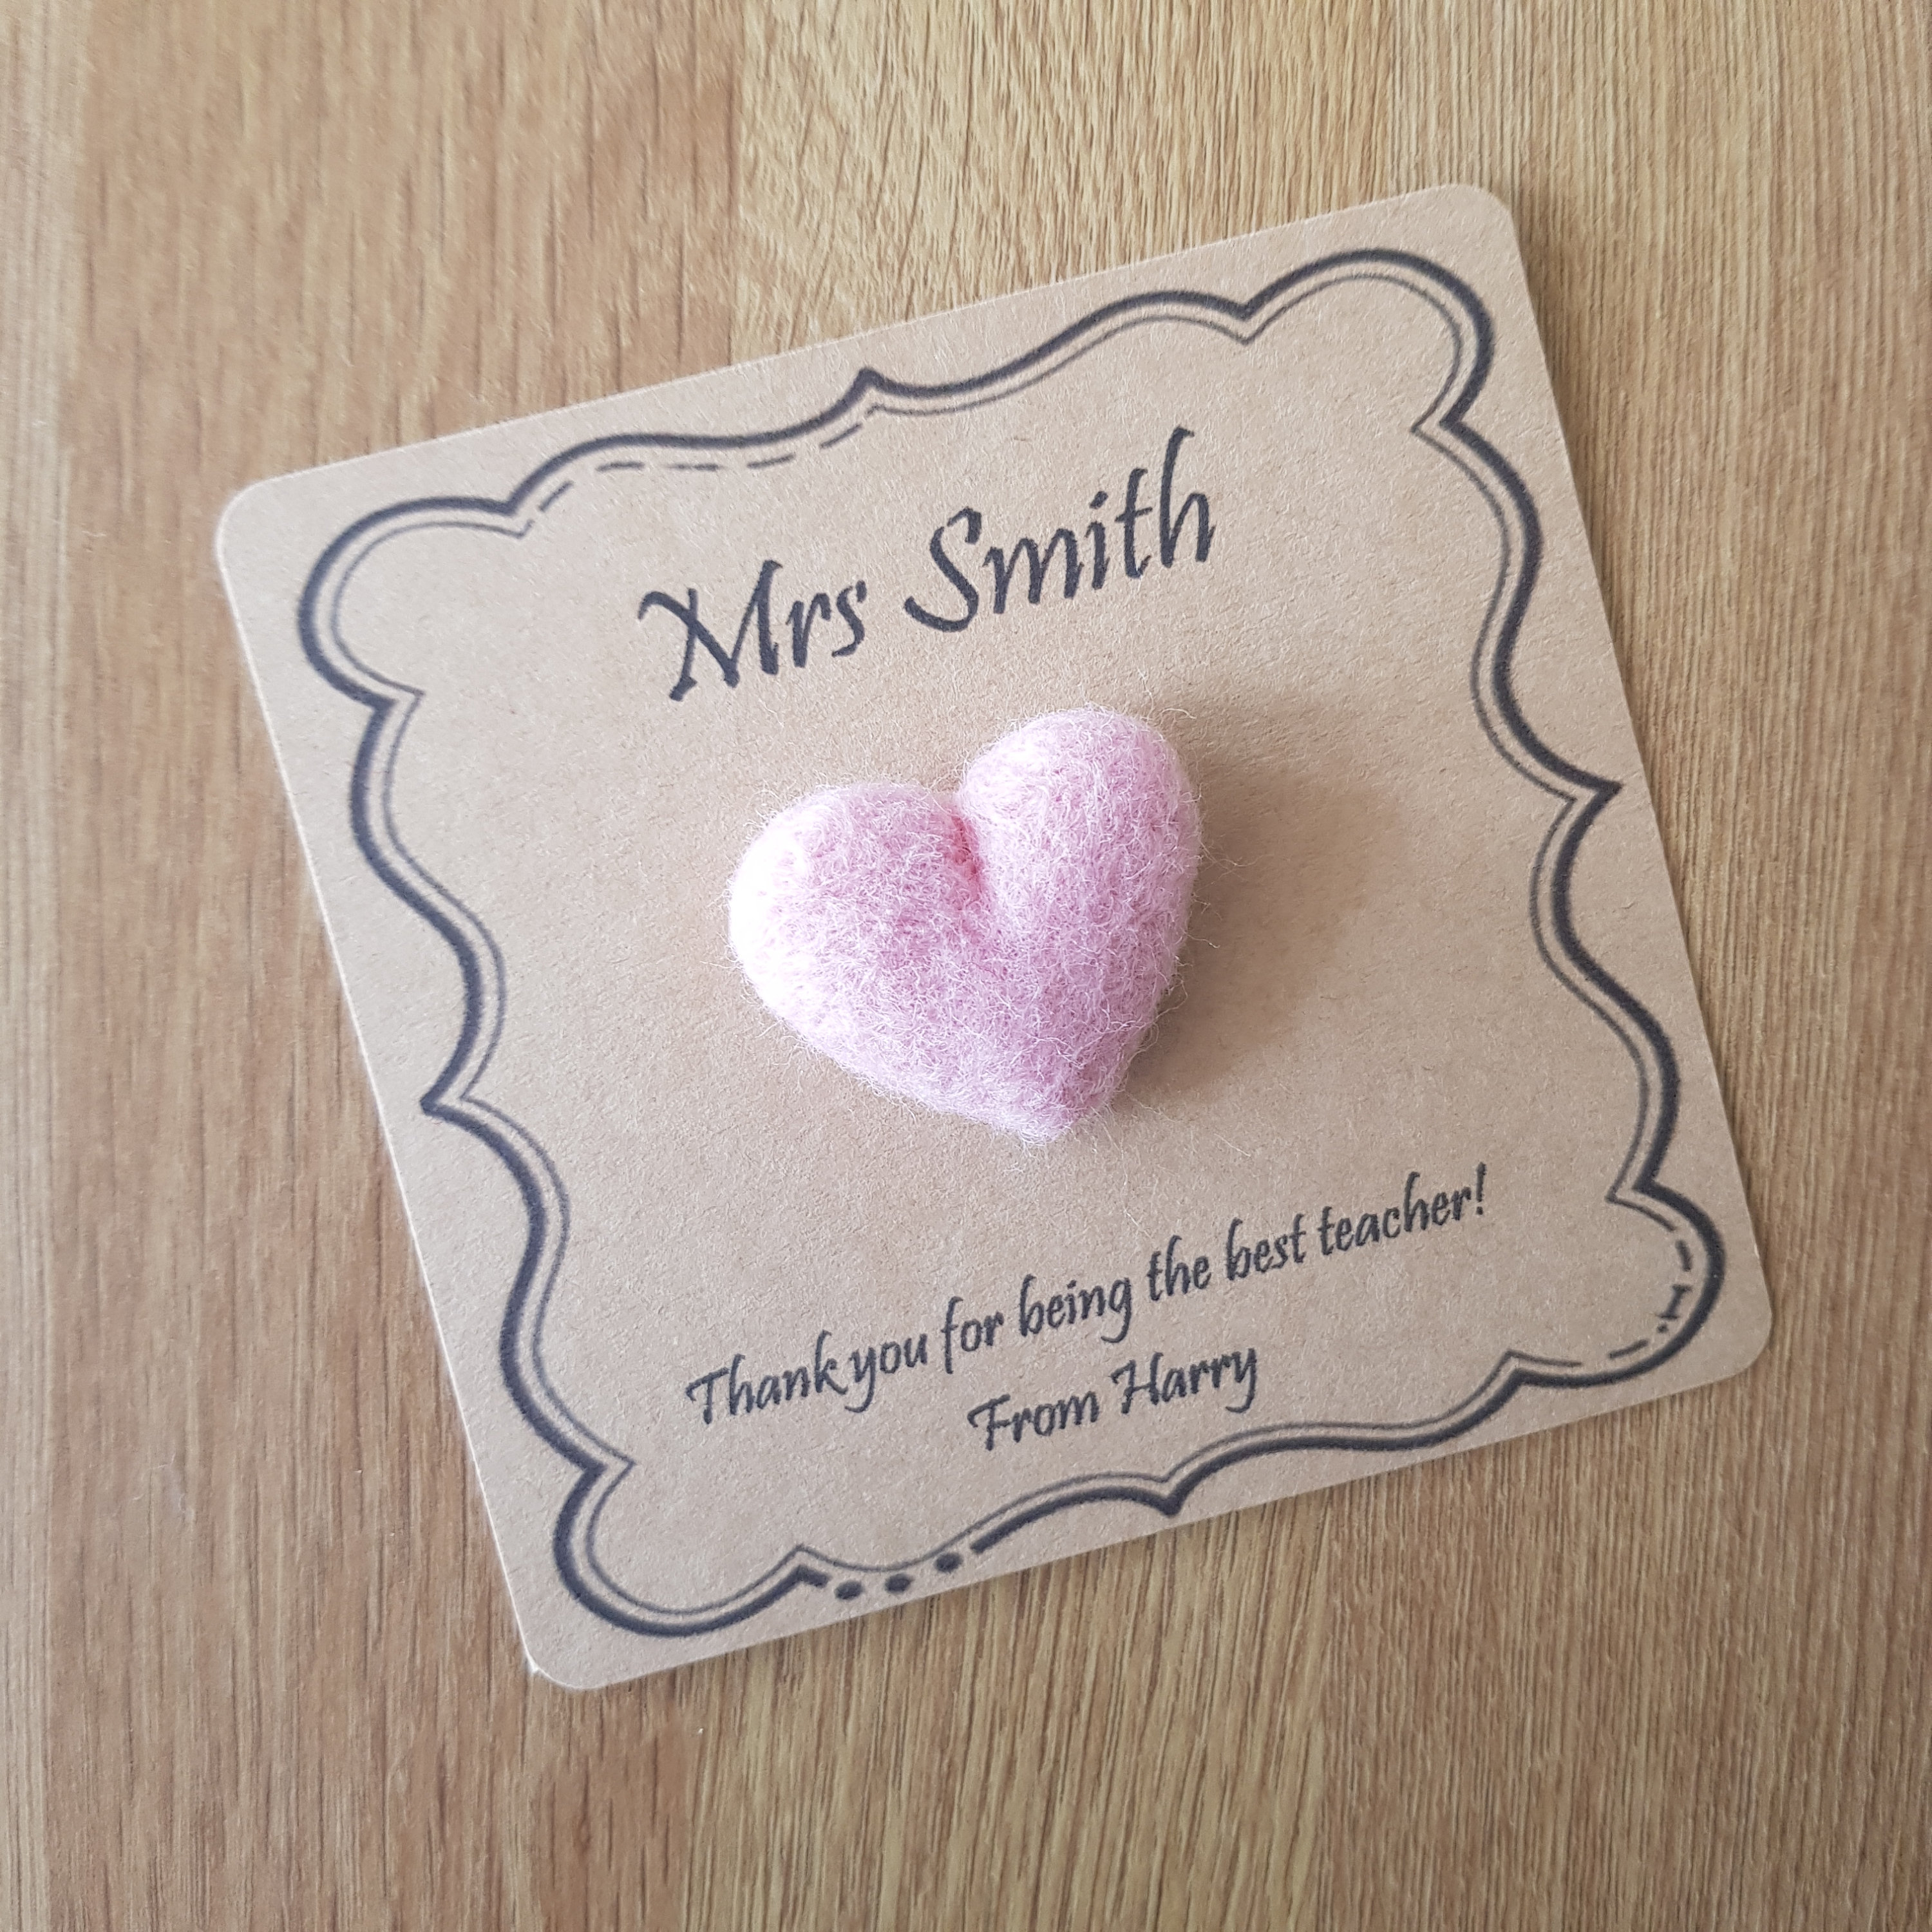 Personalised Gift Needle Felted Heart Brooch Handmade in Pretty Pale Pink